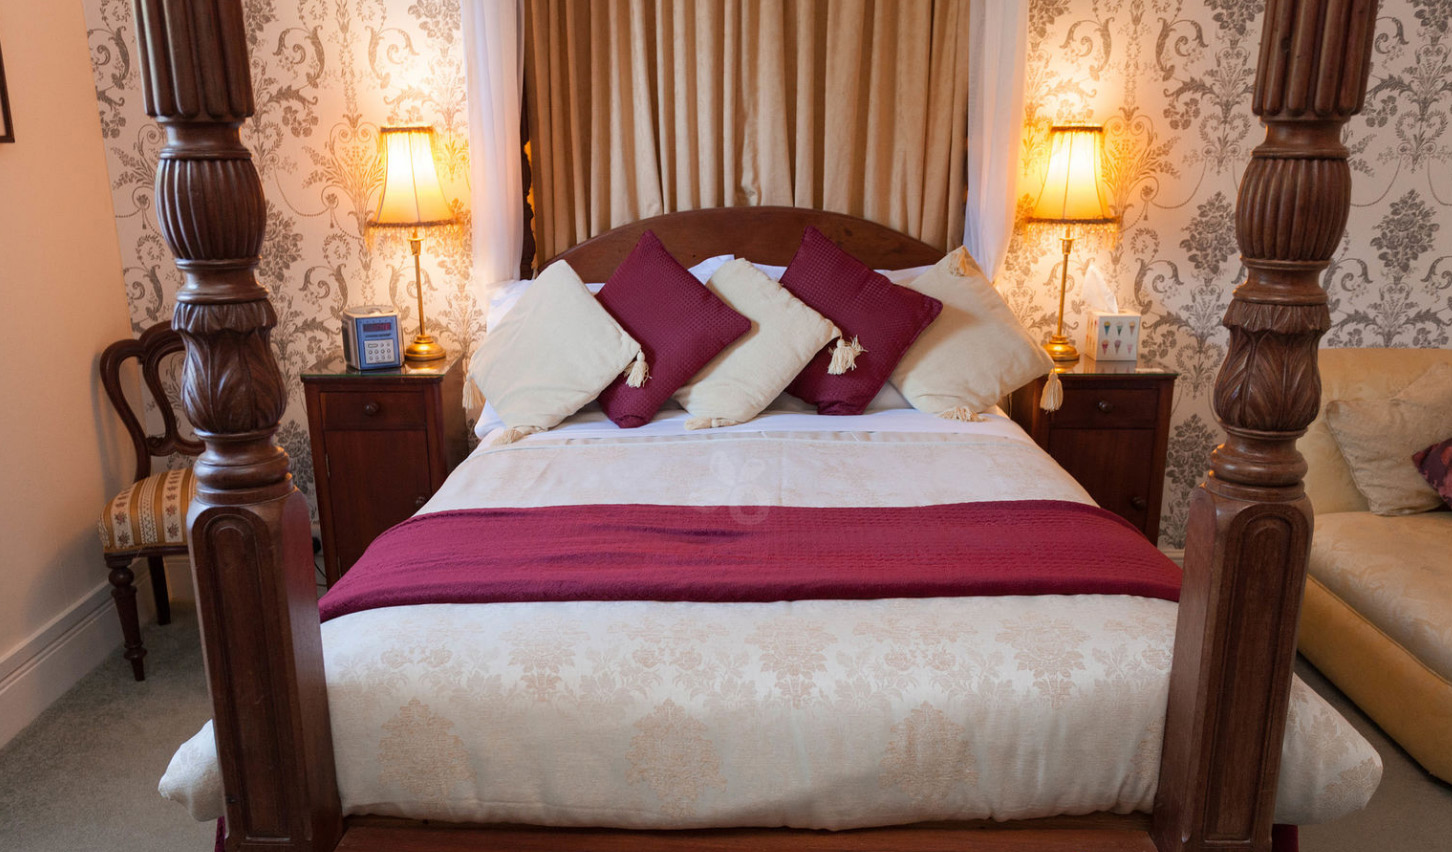 B&B bed and breakfast Guesthouse Torquay Seafront